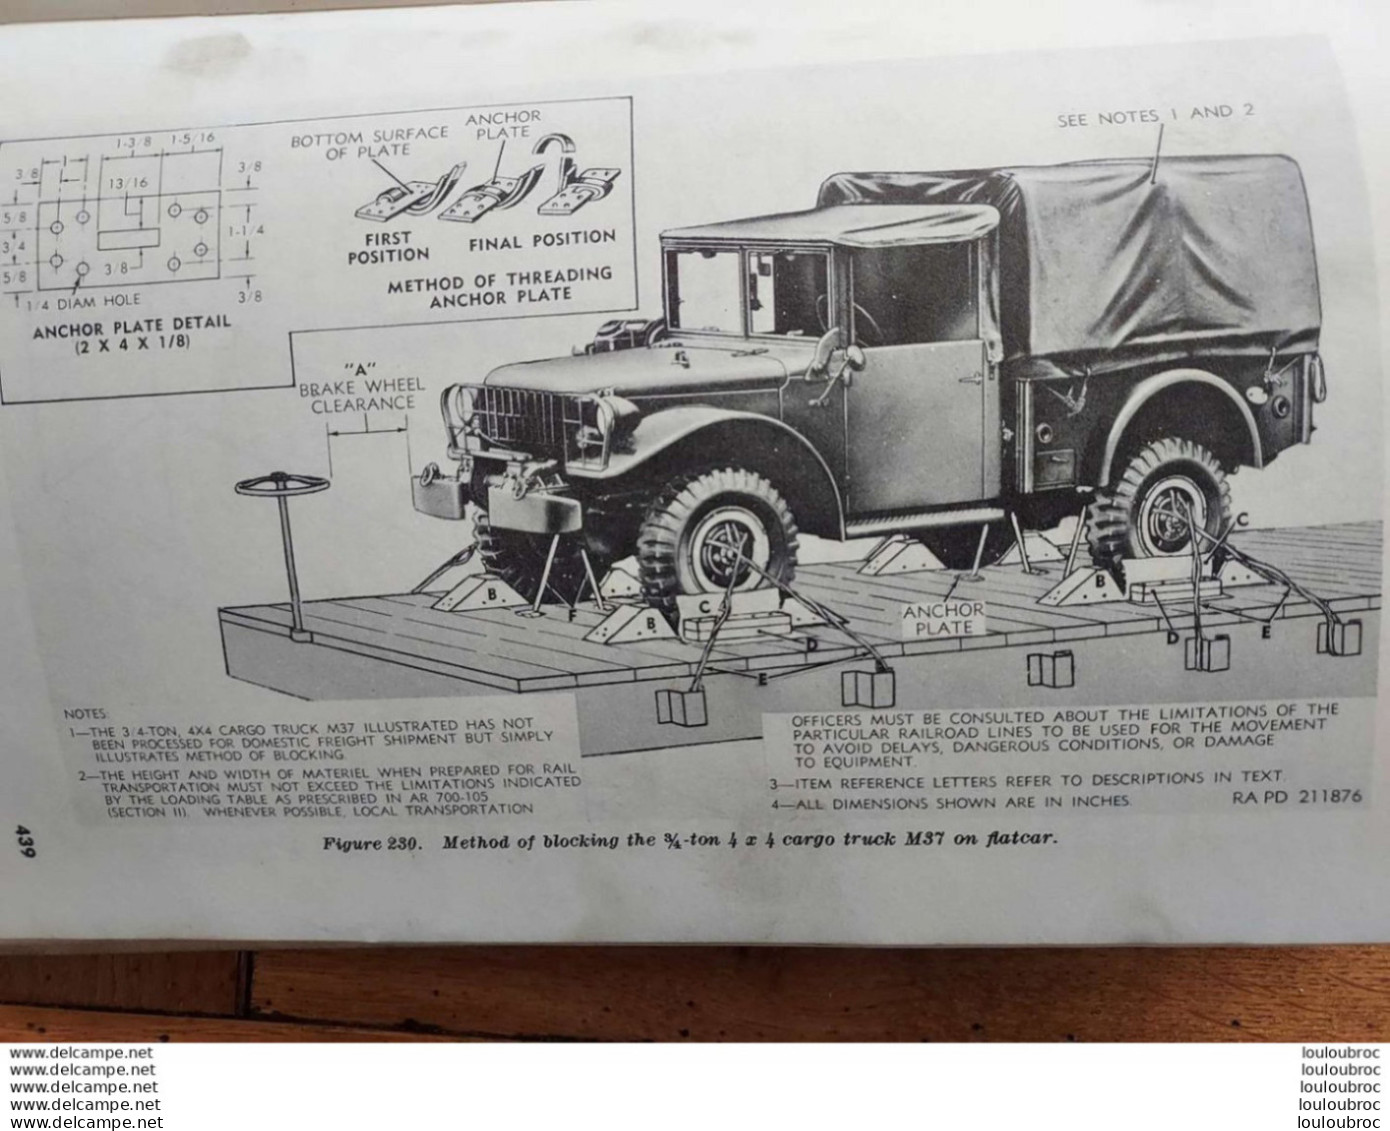 CARGO TRUCK   AMBULANCE TRUCK LIVRE MAINTENANCE 1955 OF THE ARMY AND THE AIR FORCE 466 PAGES ECRIT EN ANGLAIS - Voitures